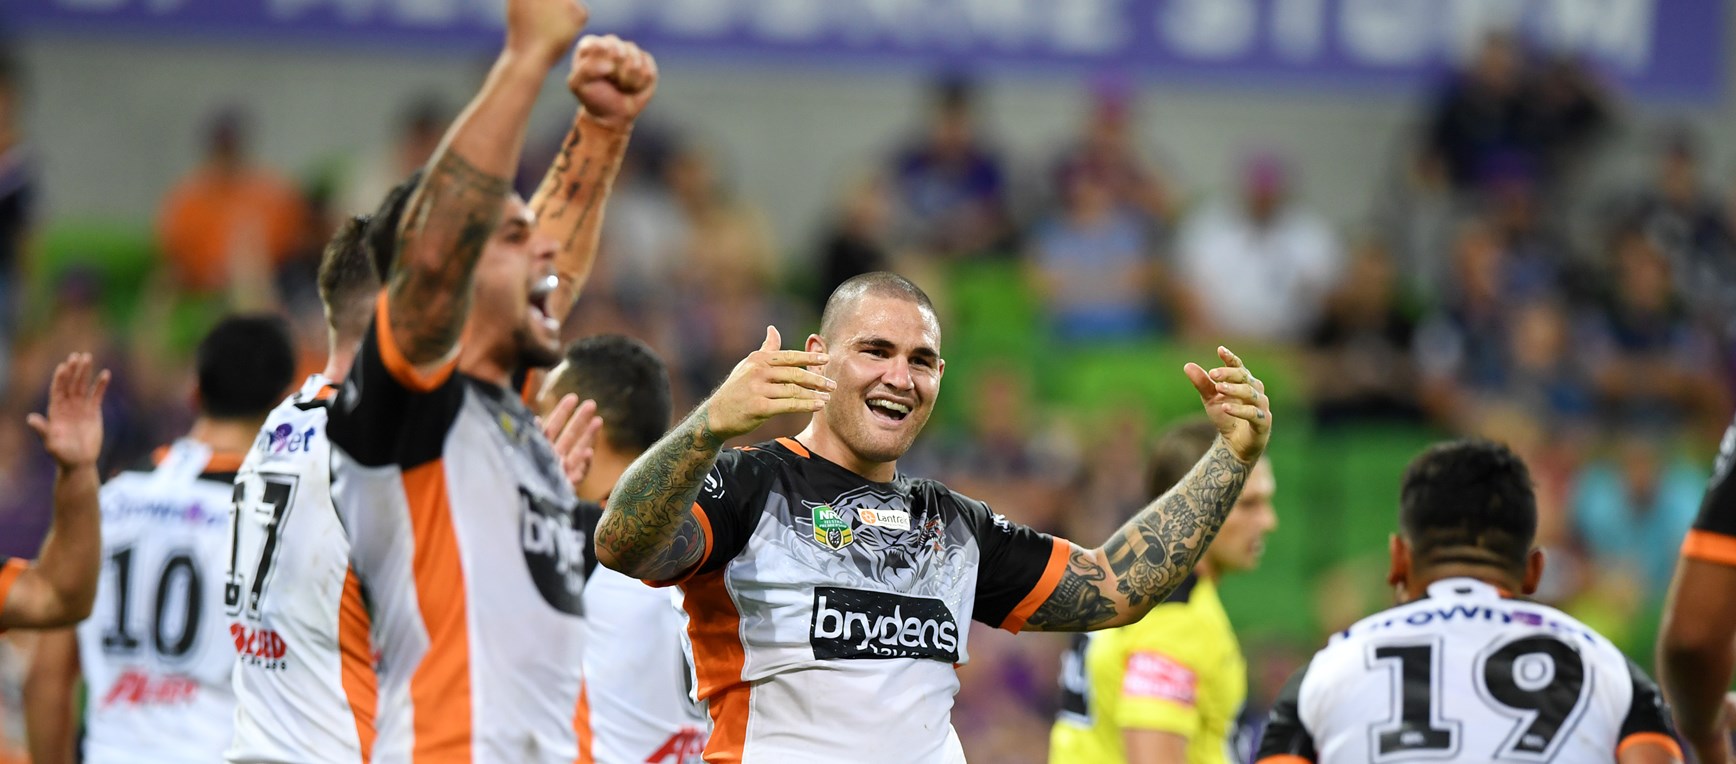 Gallery: Storm vs. Wests Tigers